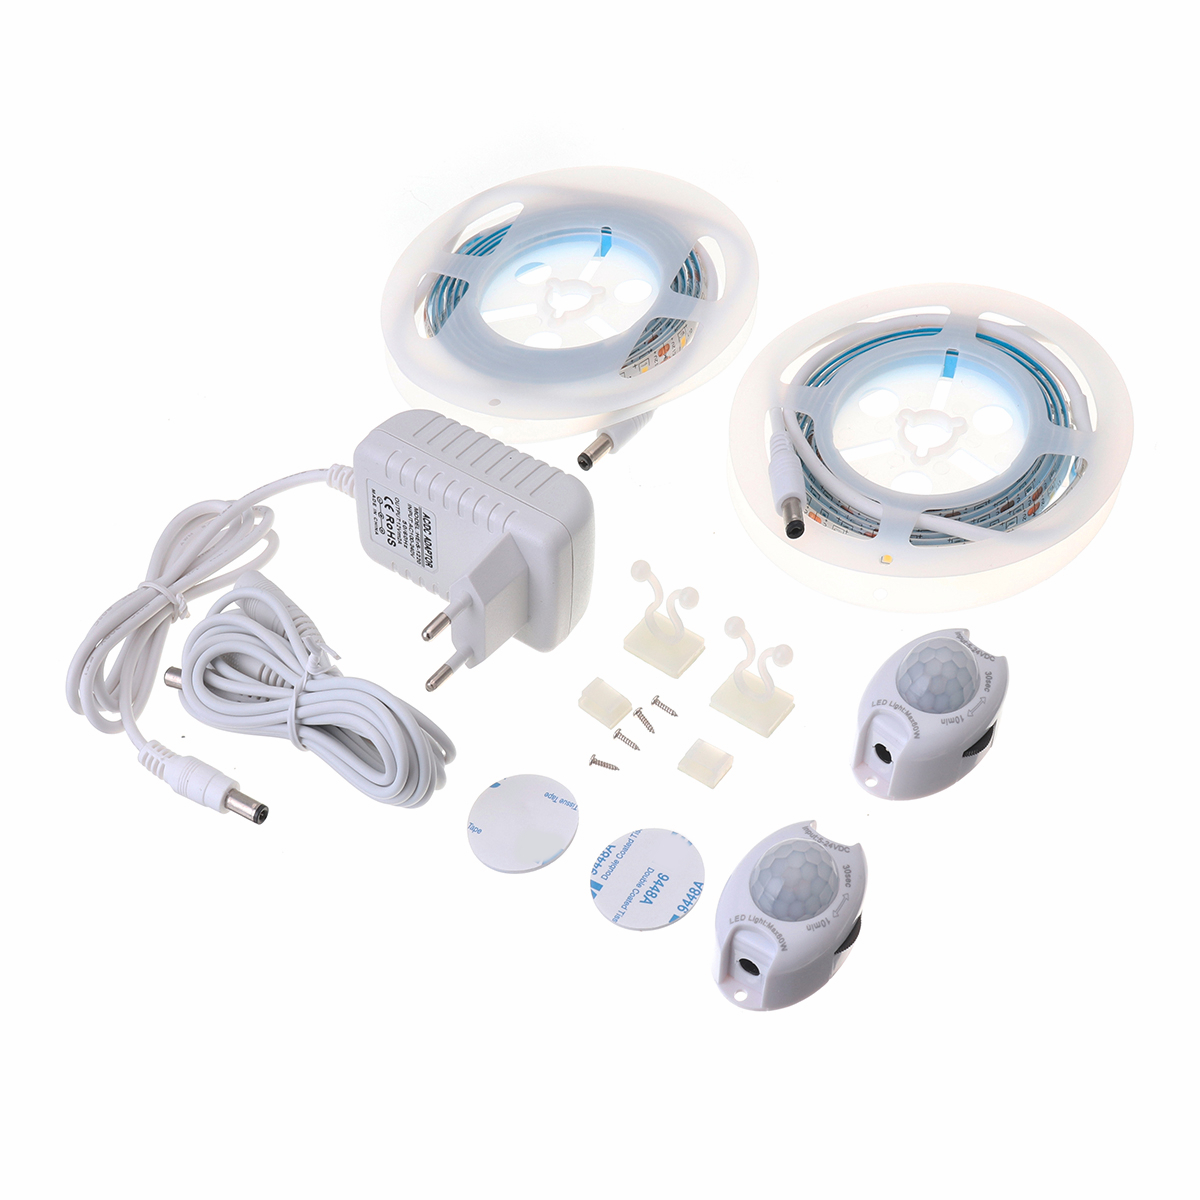 15M-3M-Motion-Activated-Sensor-Flexible-LED-Strip-Light-Bed-Night-Lamp-with-Switch-EU-Plug-DC12V-1298415-1